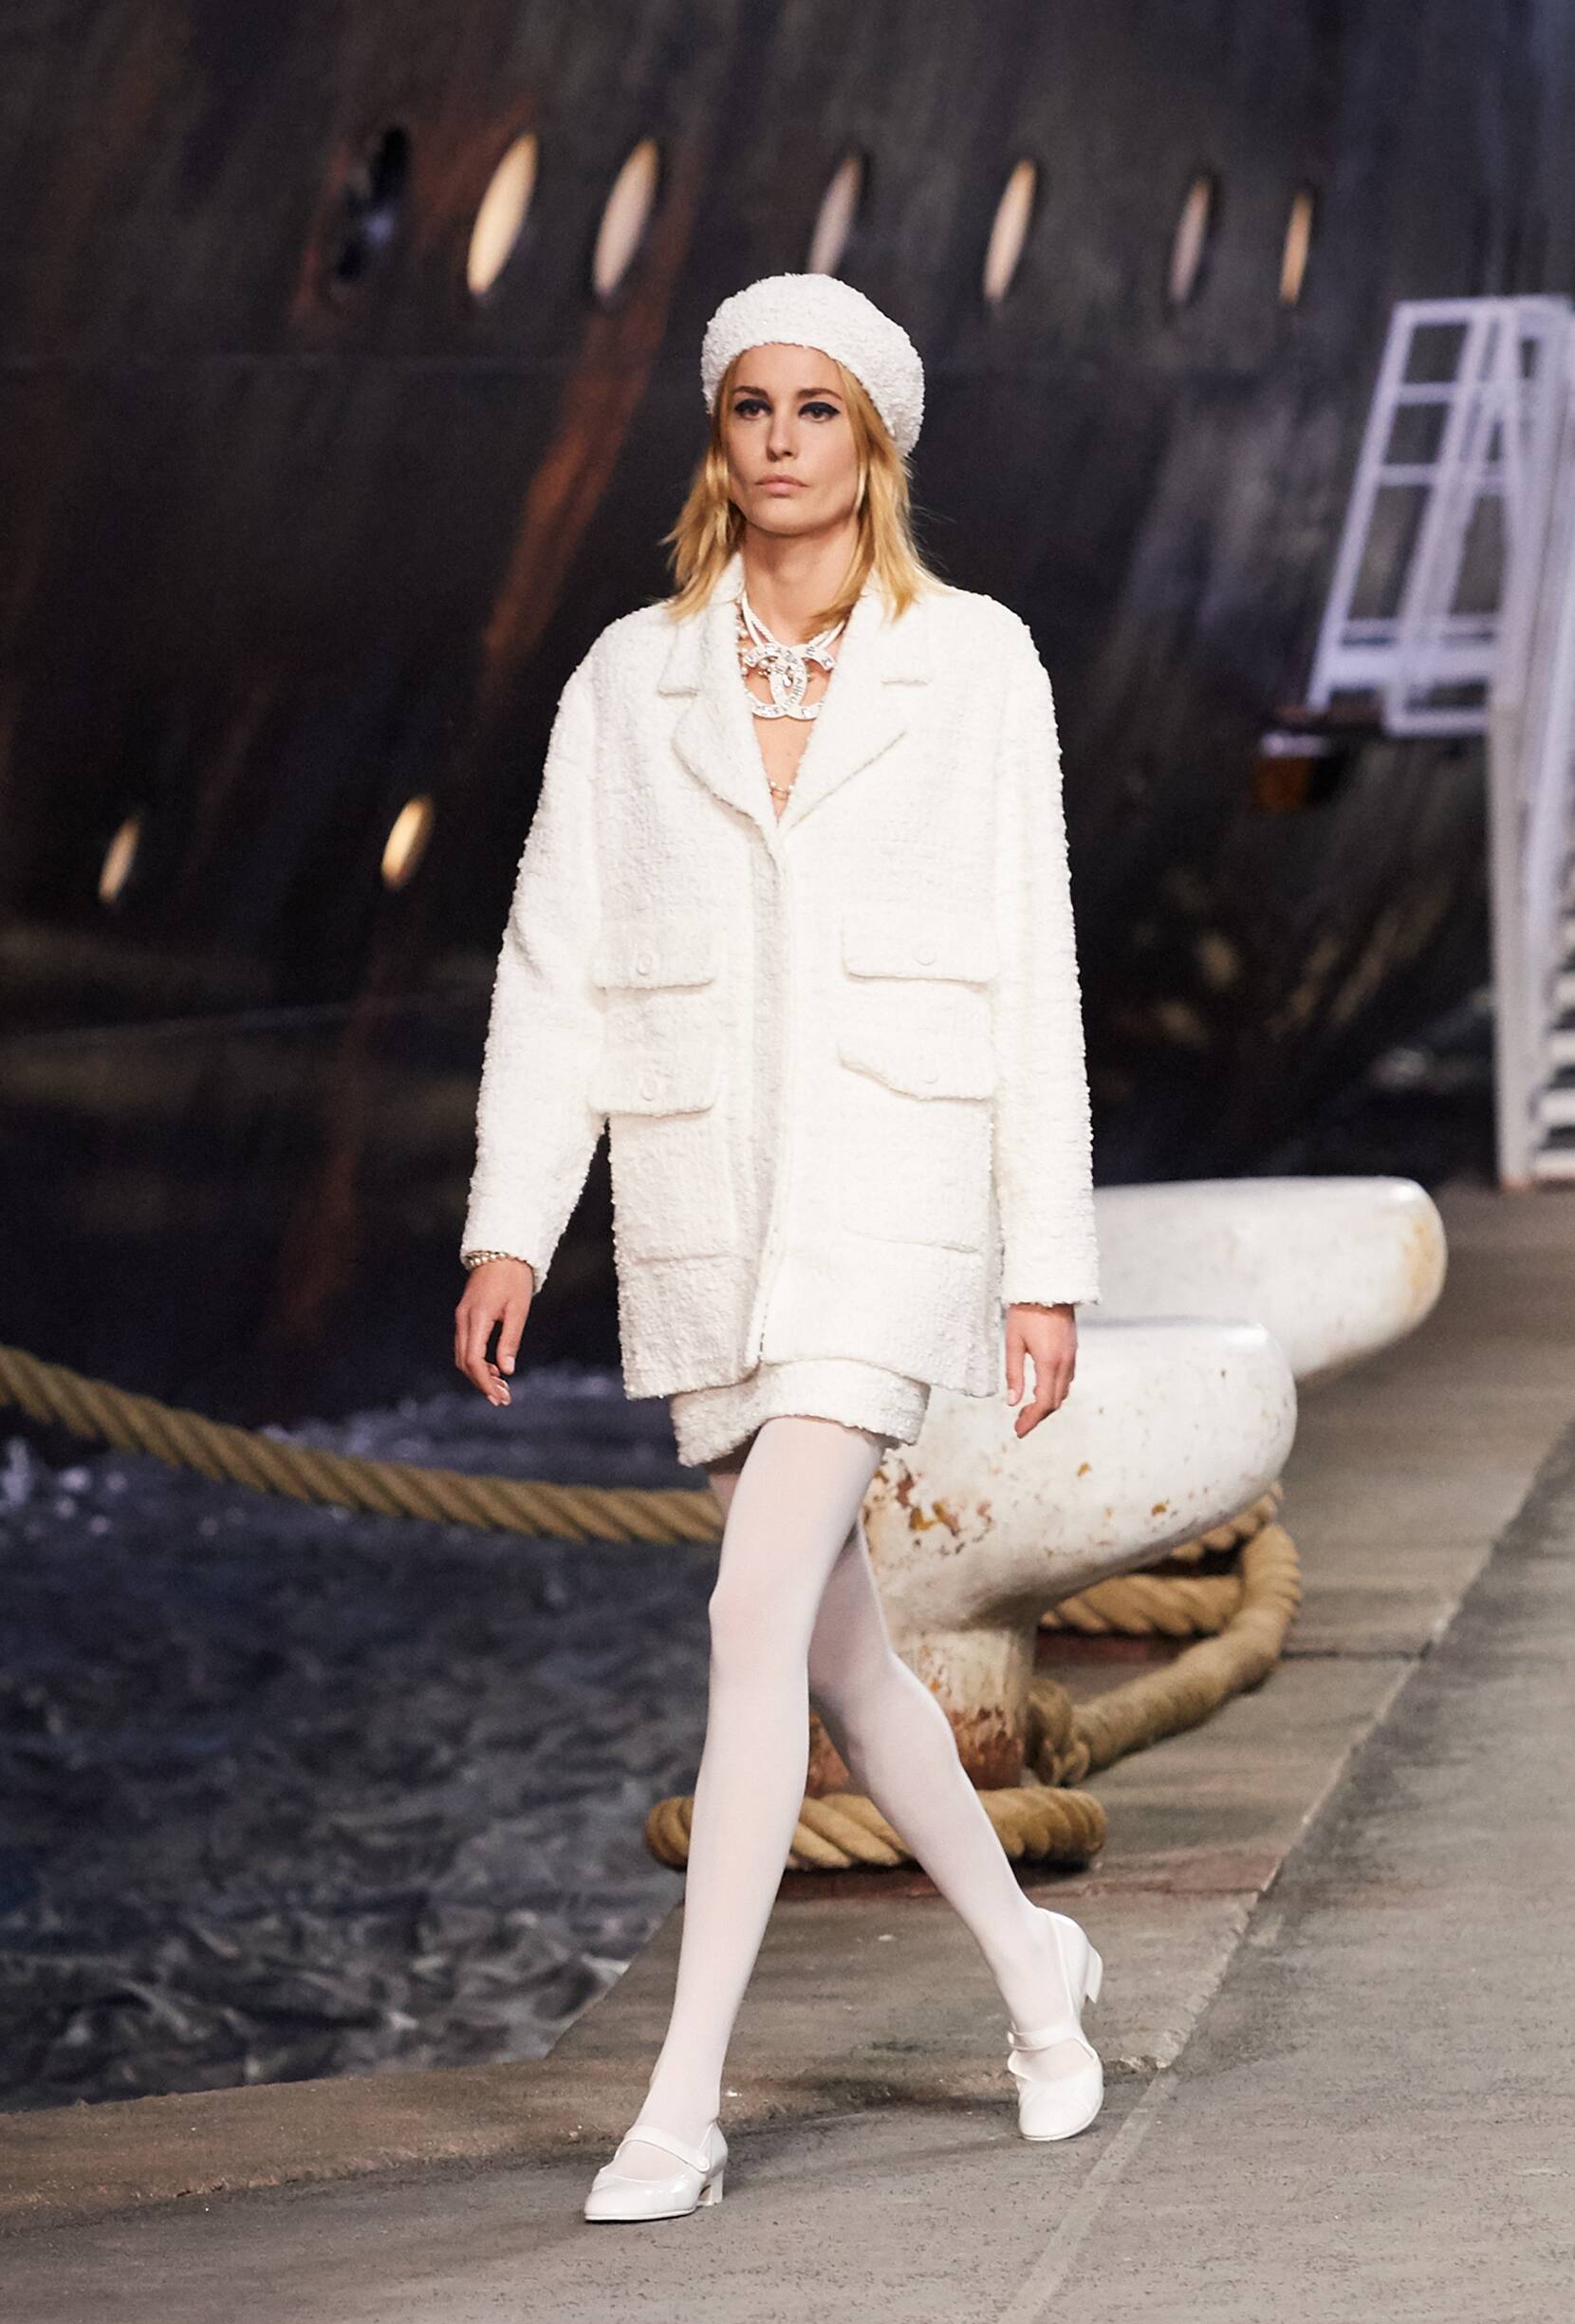 Chanel's Couture Show Celebrates the Discreet Charm of the Parisienne